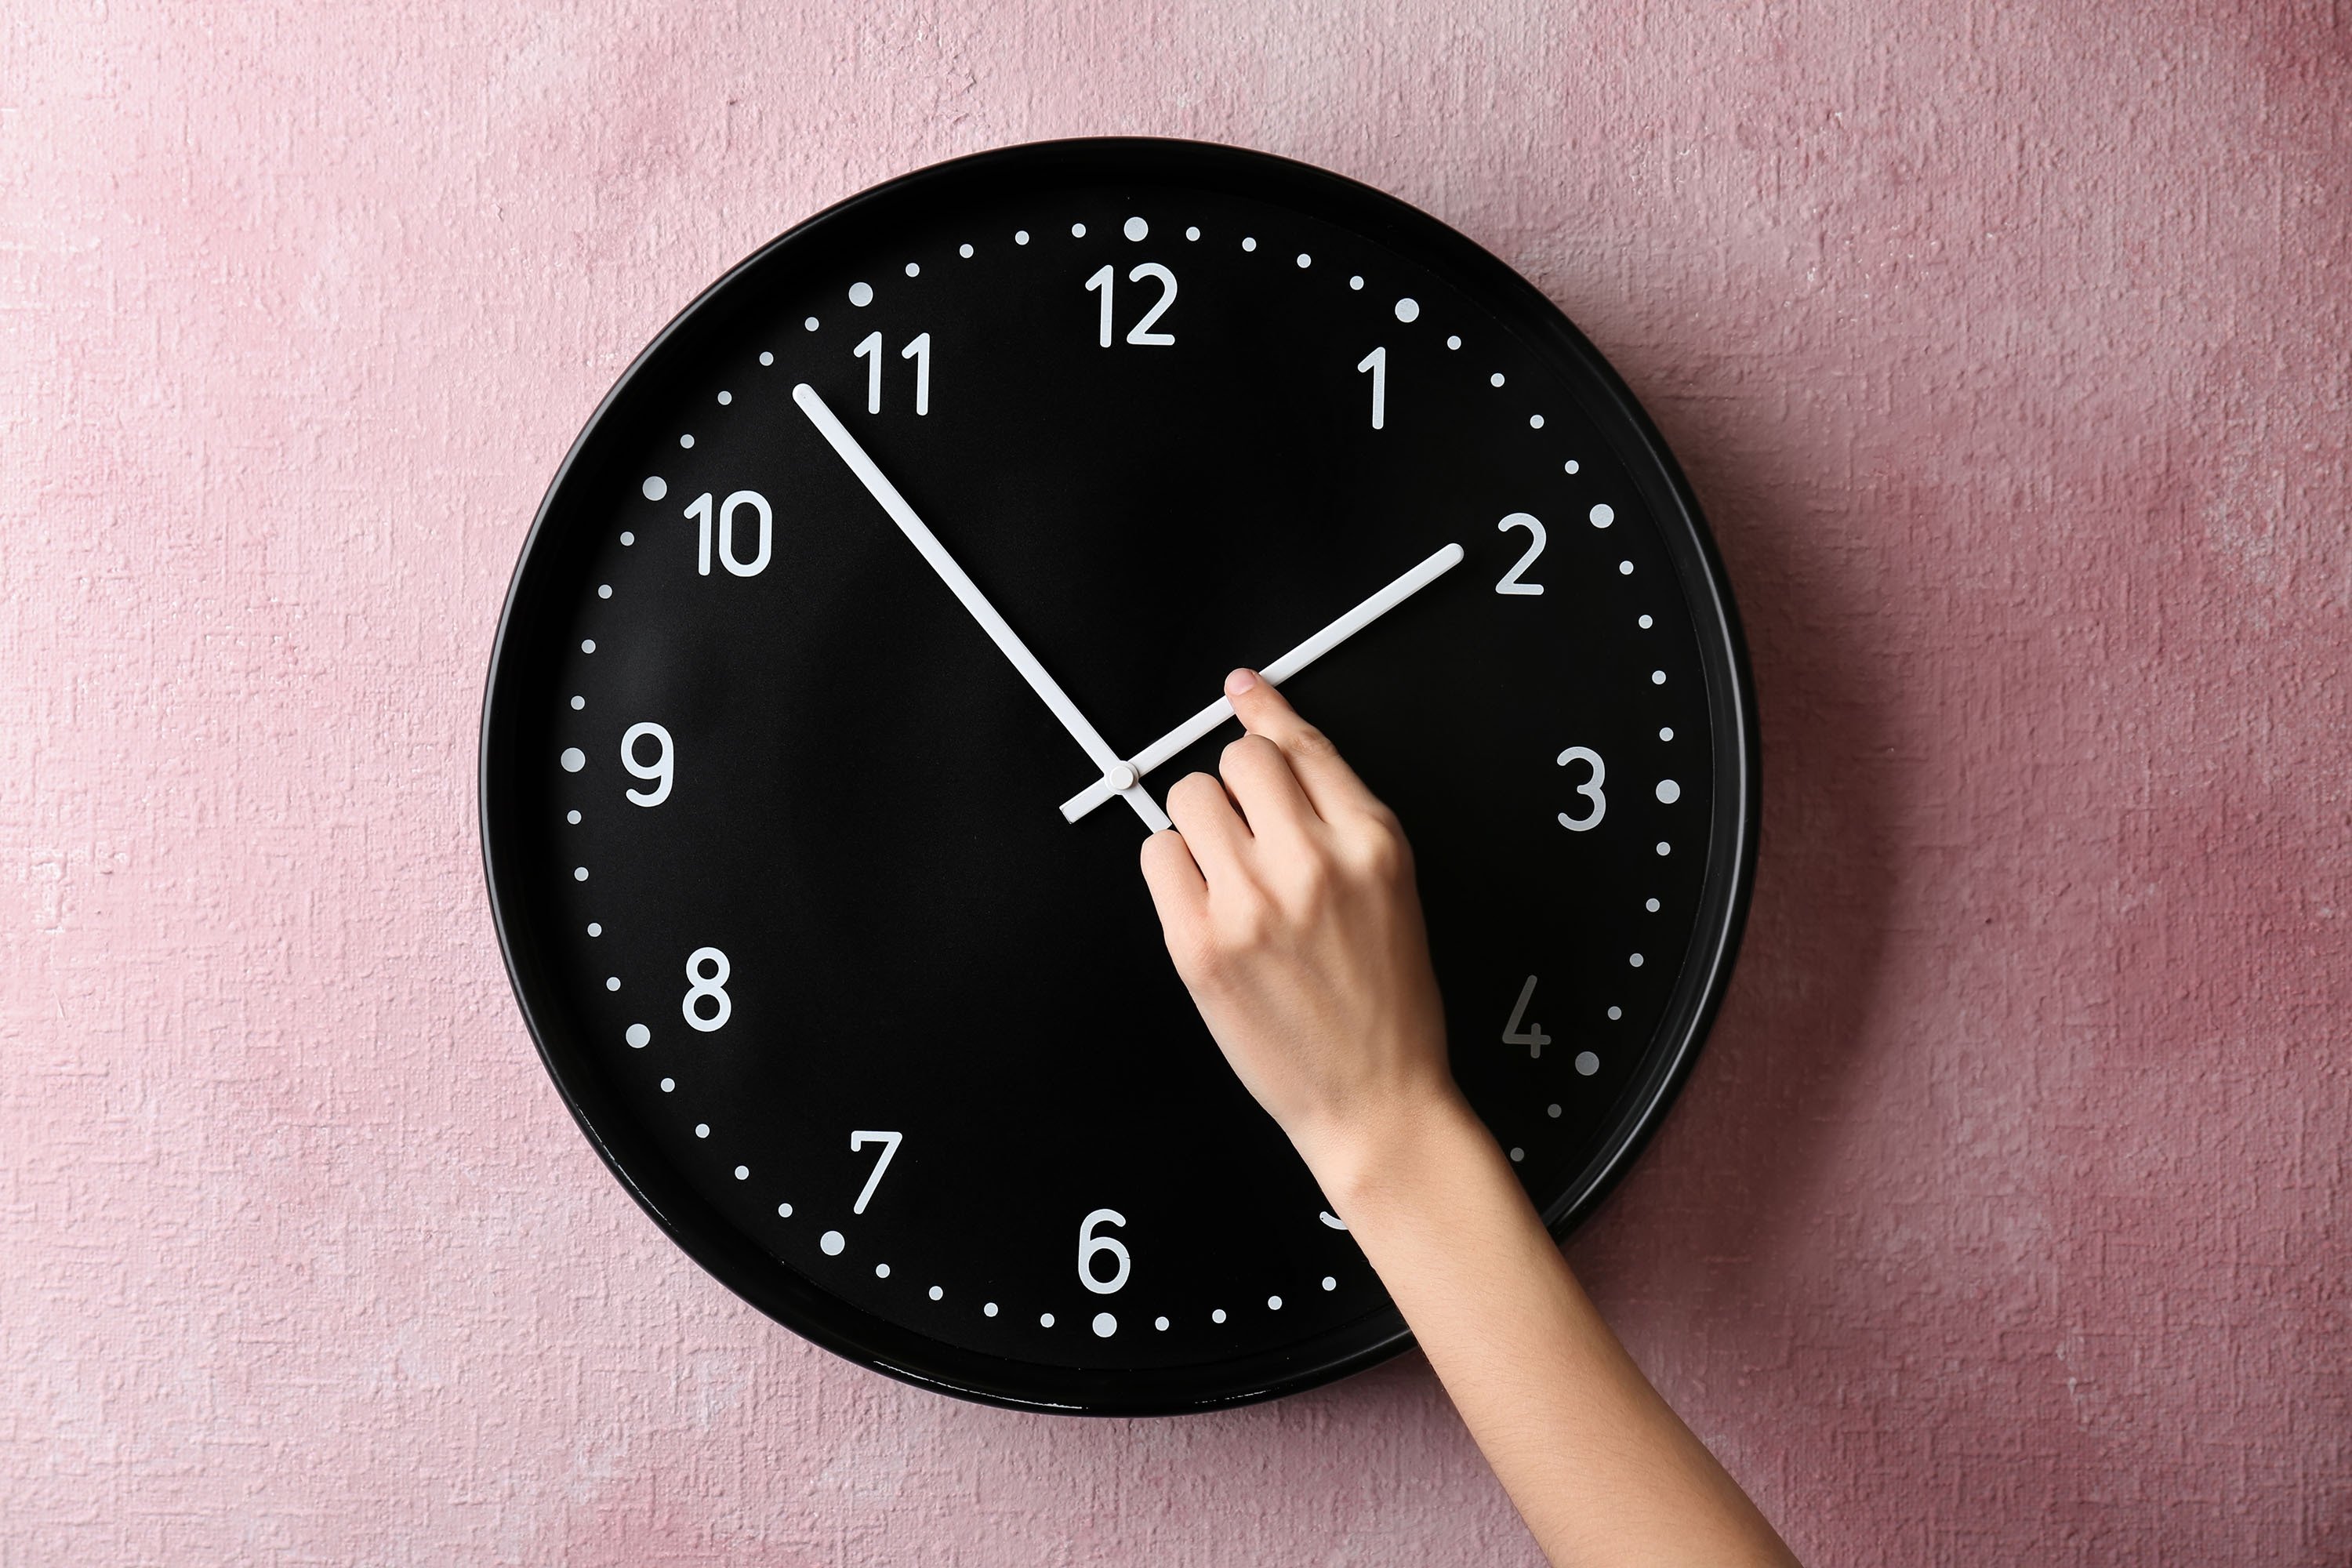 All in an hour: How daylight saving time can impact your life | Daily Sabah